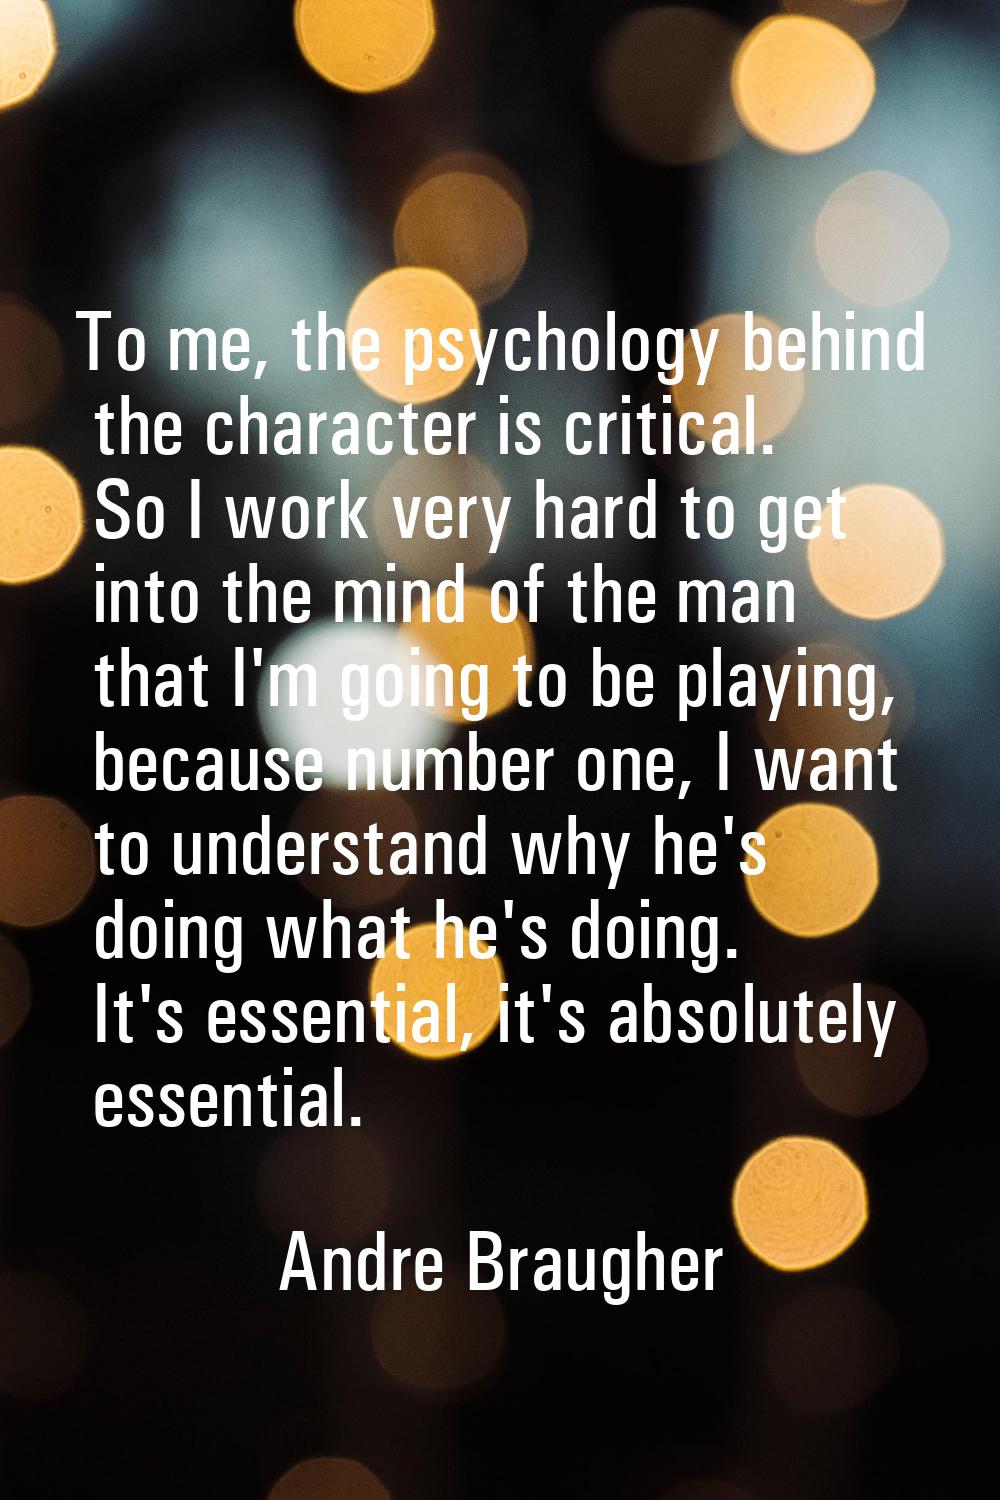 To me, the psychology behind the character is critical. So I work very hard to get into the mind of